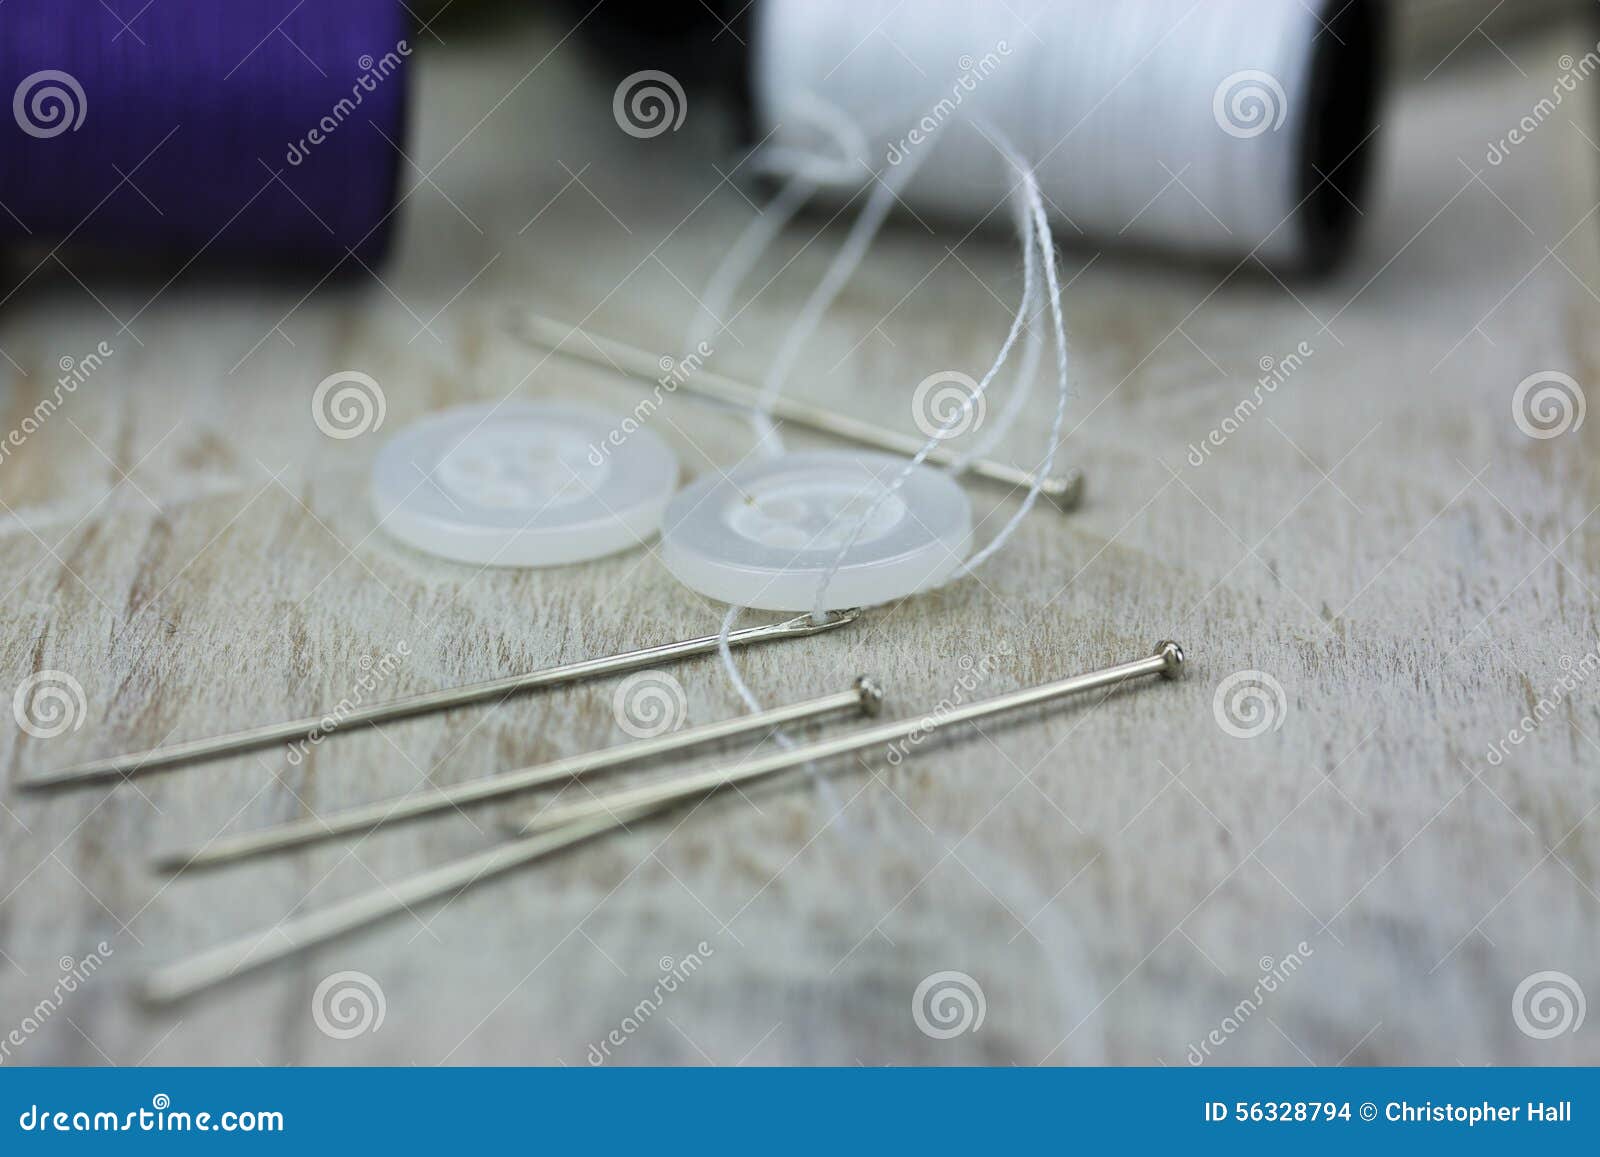 Sewing Cotton Needle and Pins Stock Photo - Image of home, hobby: 56328794